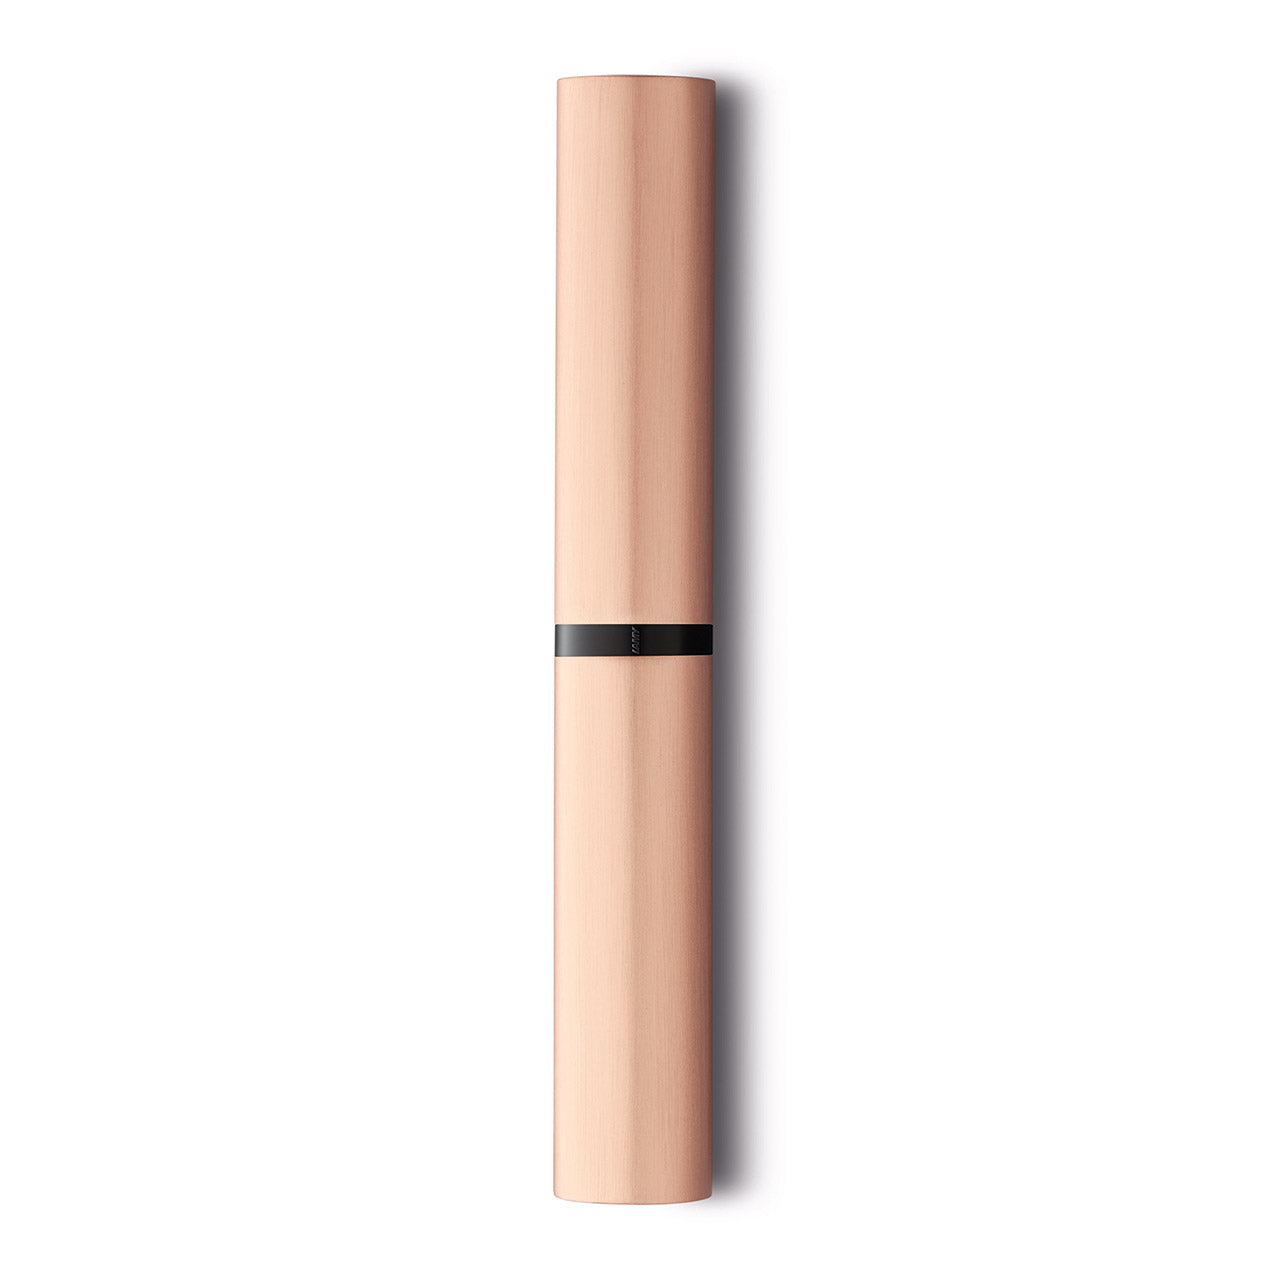 Lamy Lx Rose Gold Ballpoint - Pencraft the boutique